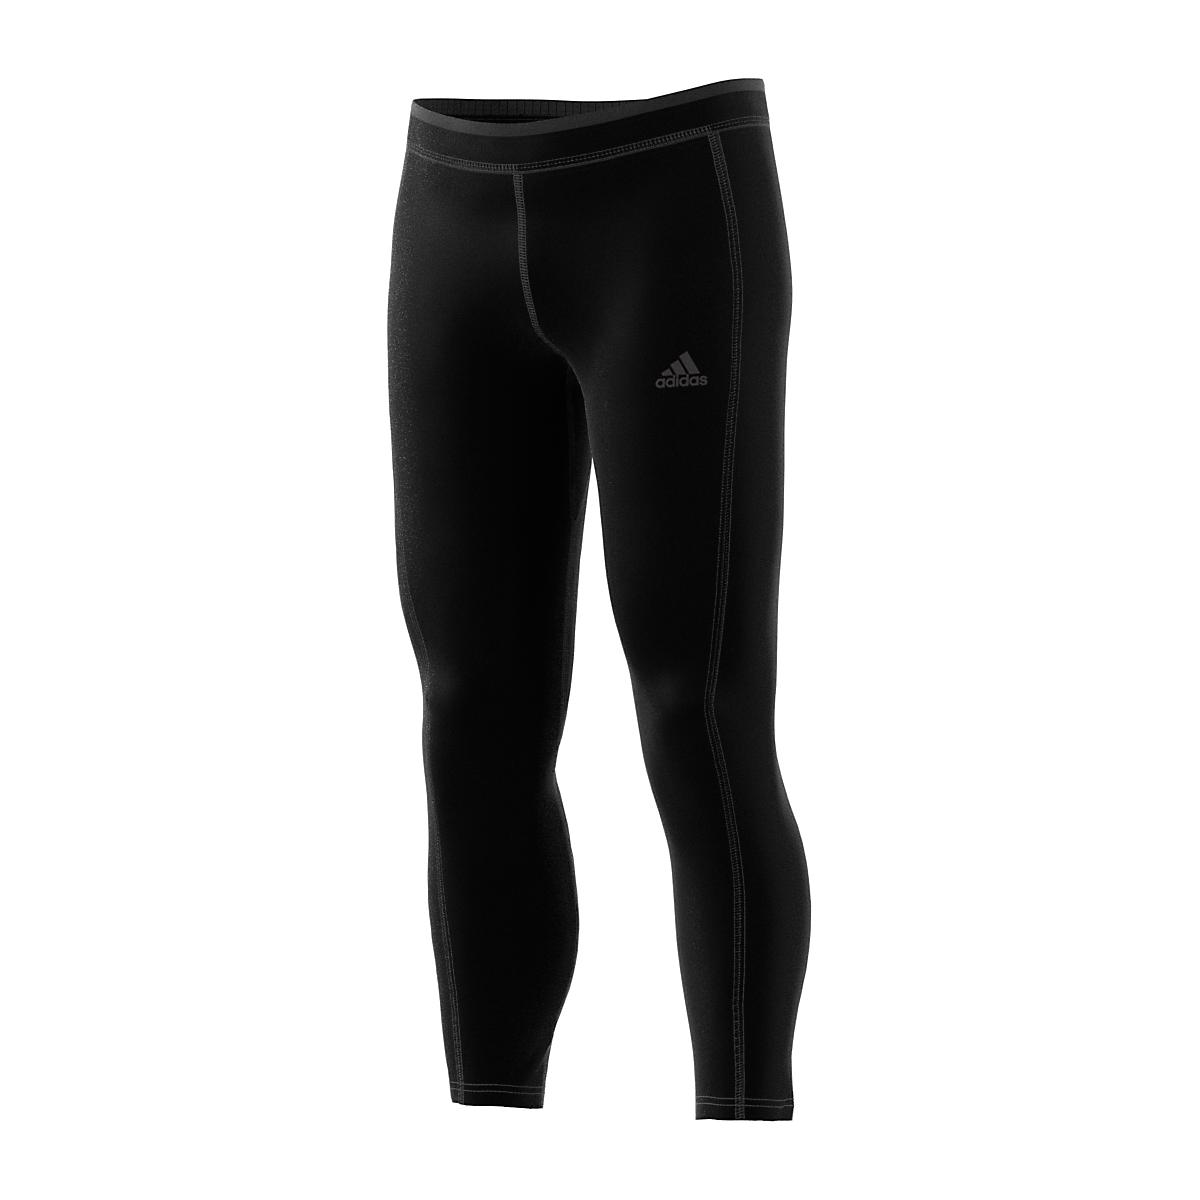 Mens CW-X Endurance Generator Fitted Tights at Road Runner Sports